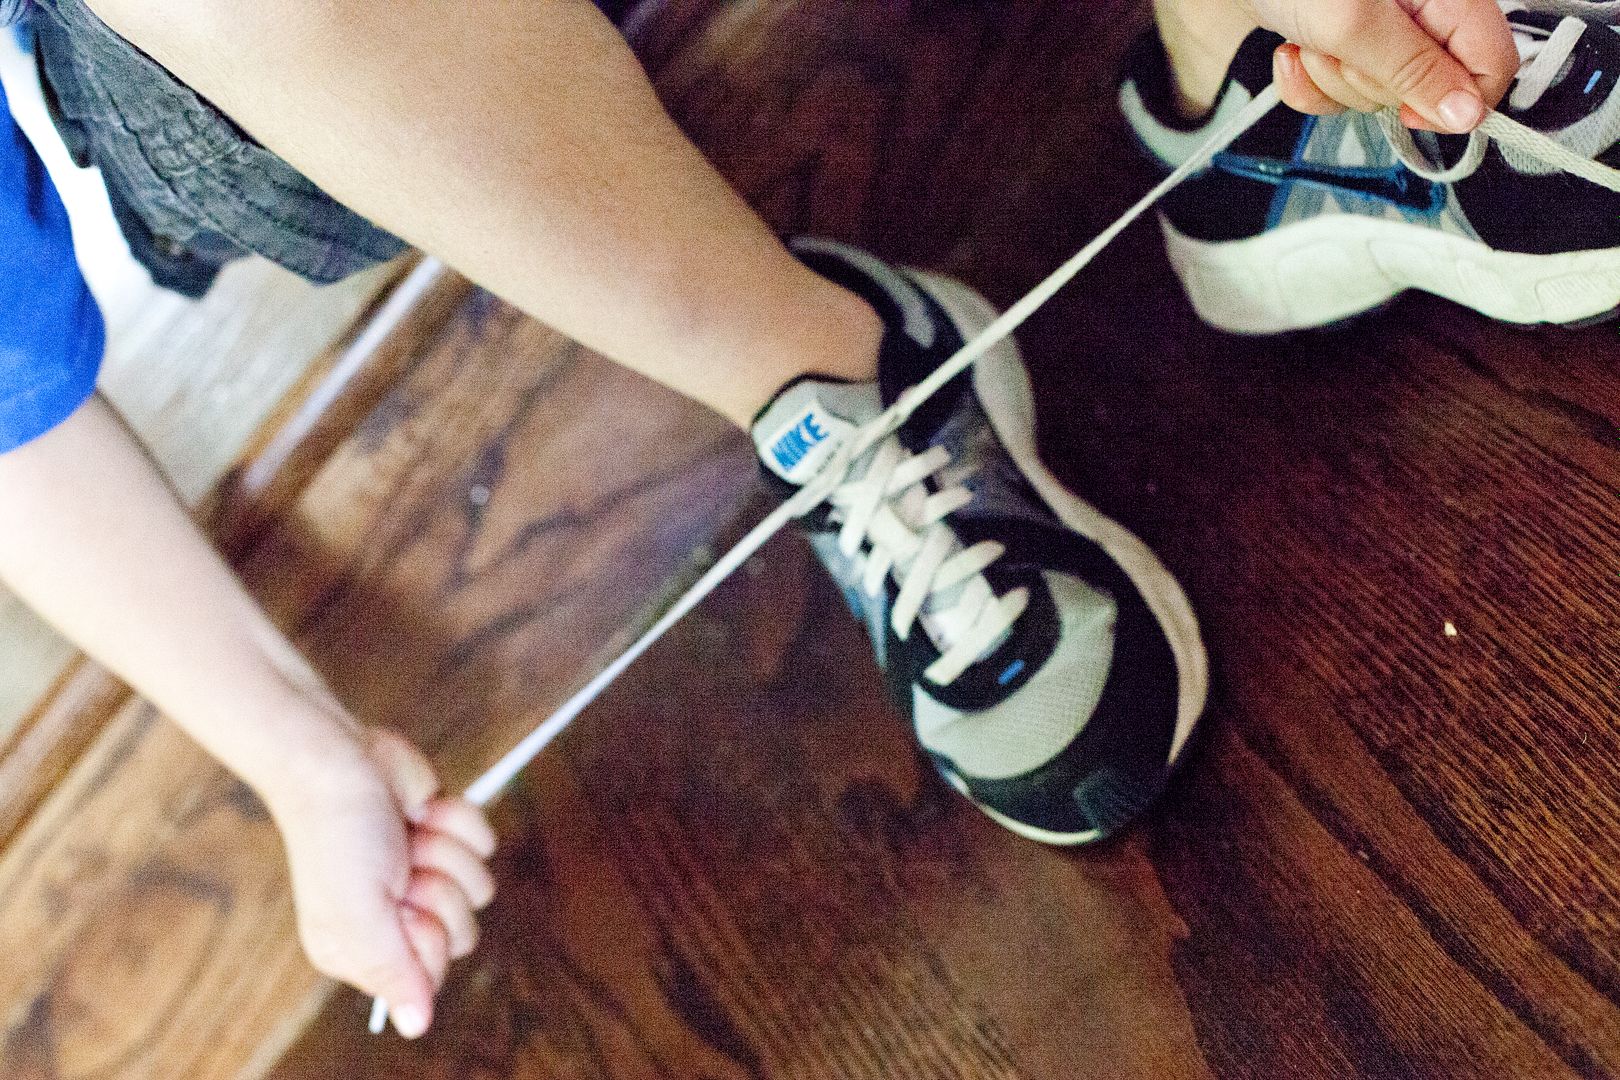 Family time: Teaching my 5 year old son how to tie his shoes